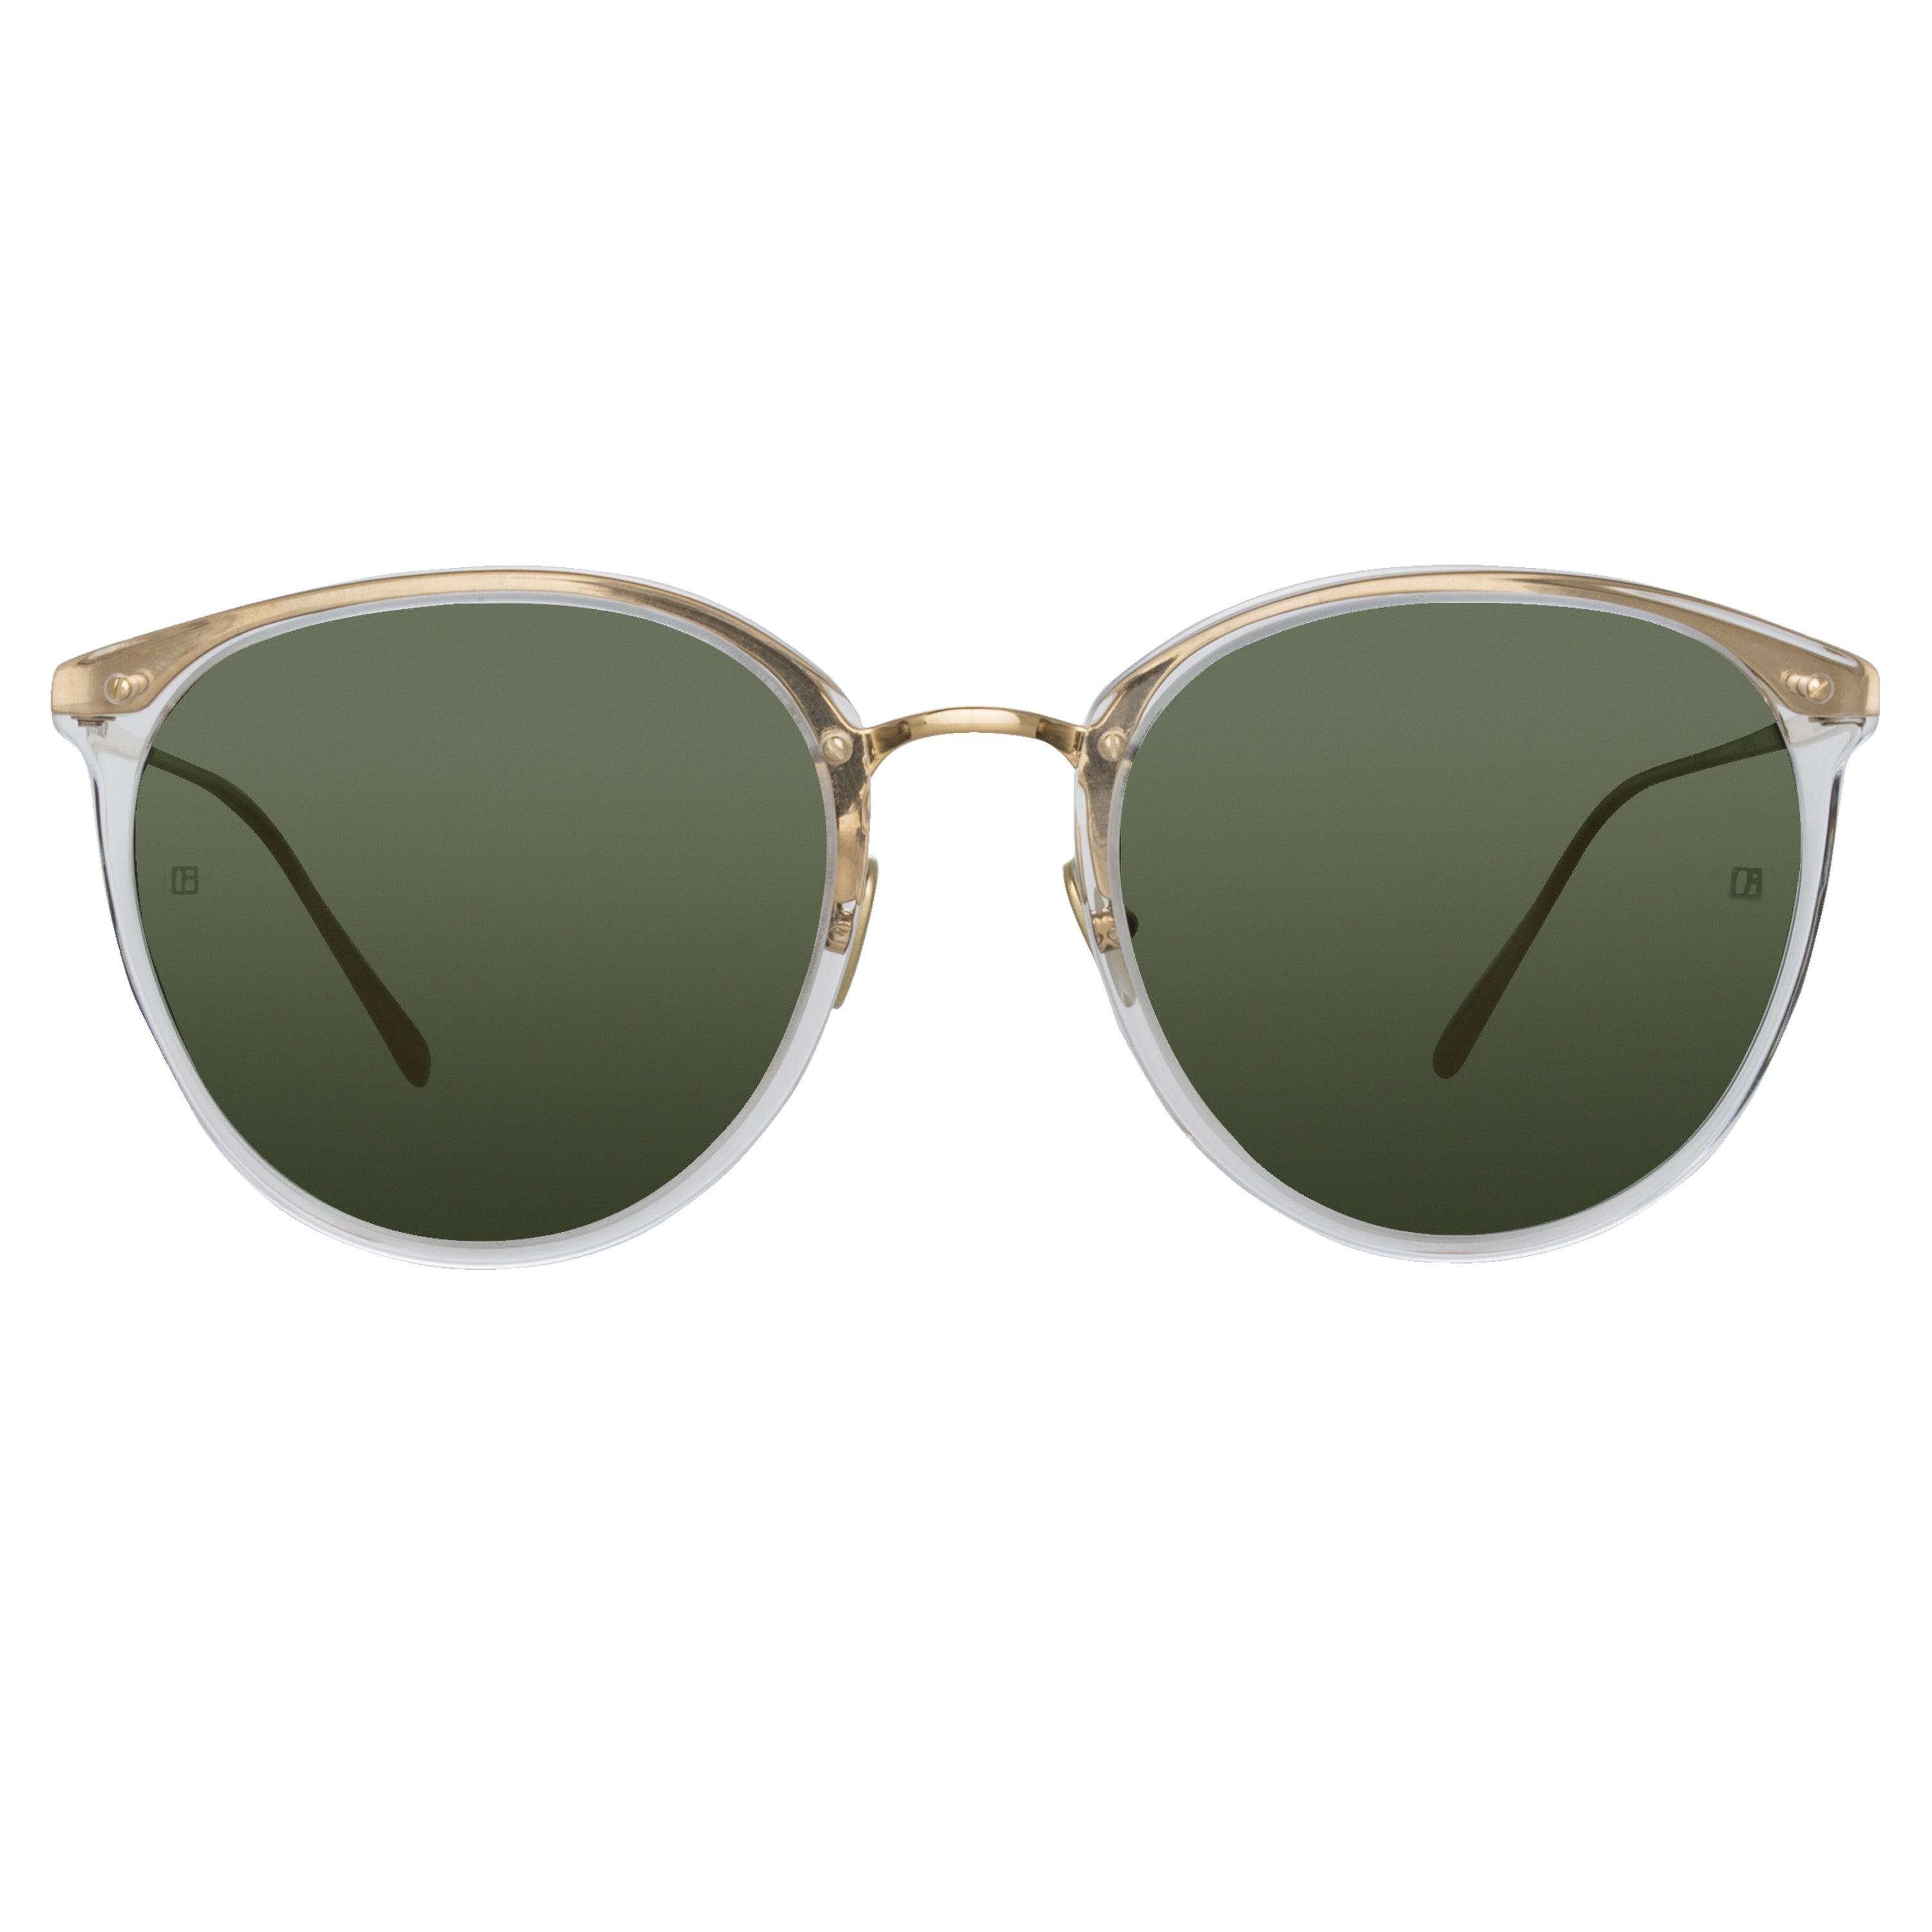 Men’s Calthorpe Oval Sunglasses in Clear